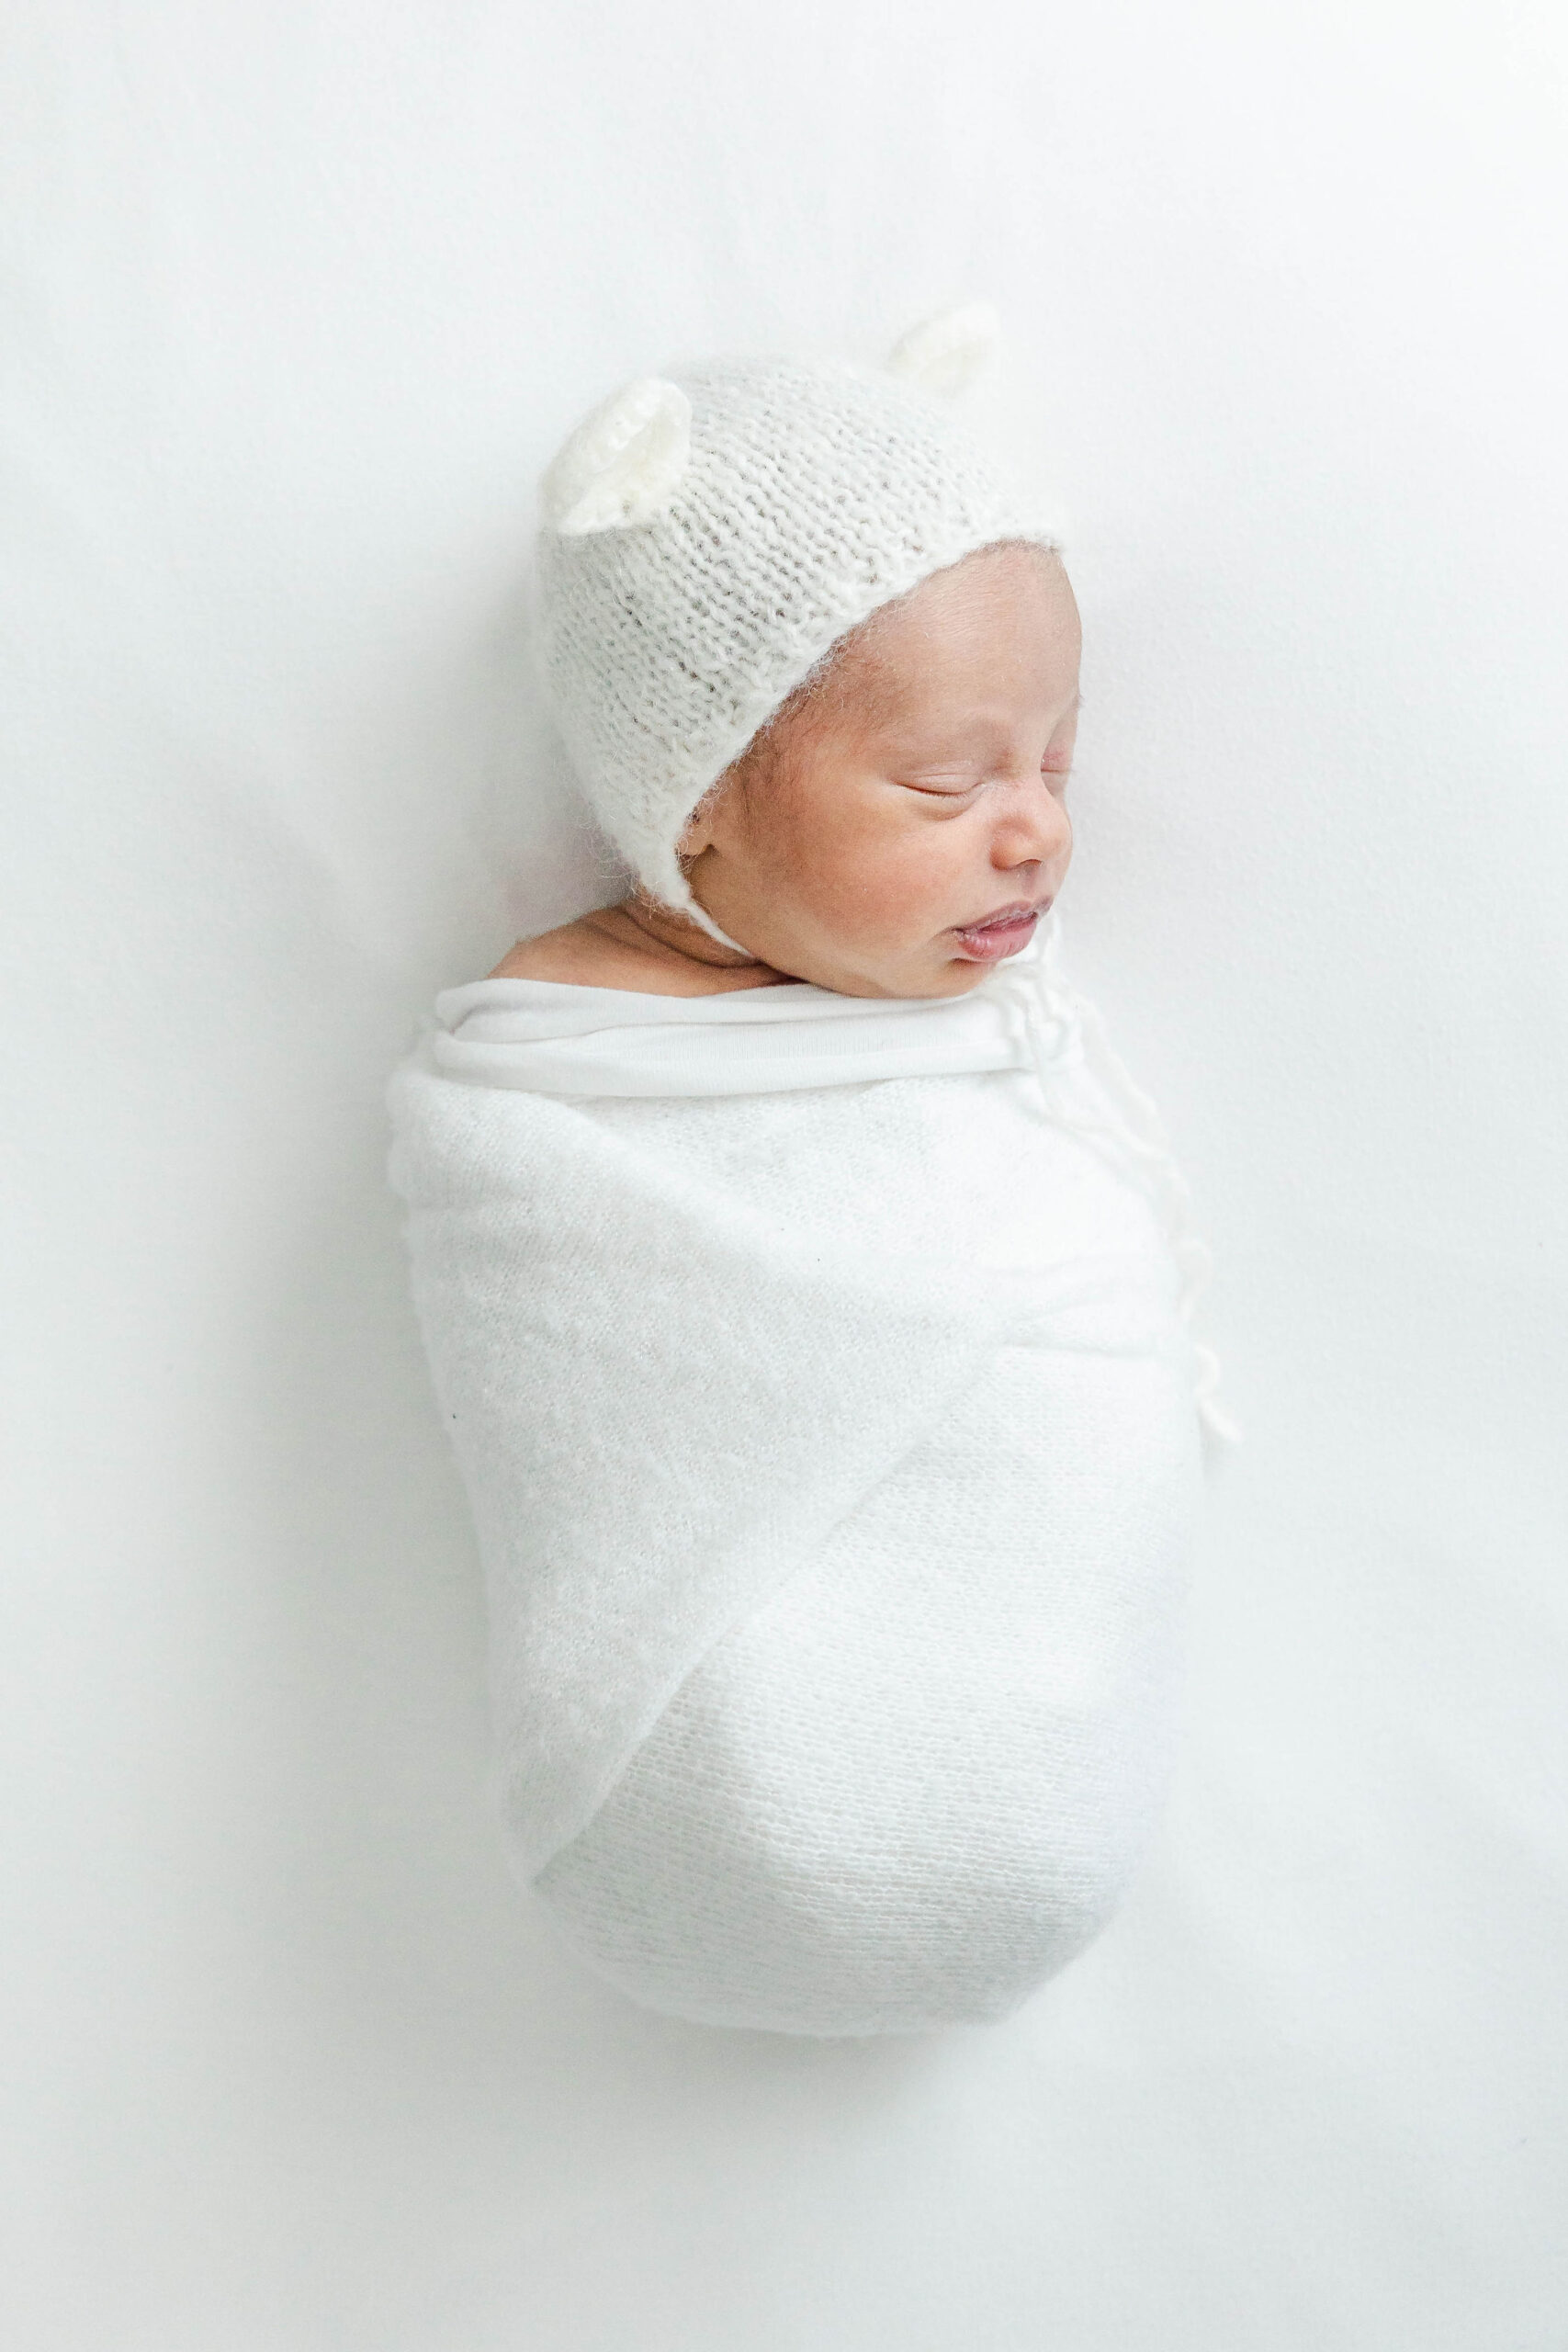 A newborn baby sleeps in a white bonnet with ears on a white bed in a studio after visiting a pediatric chiropractor miami